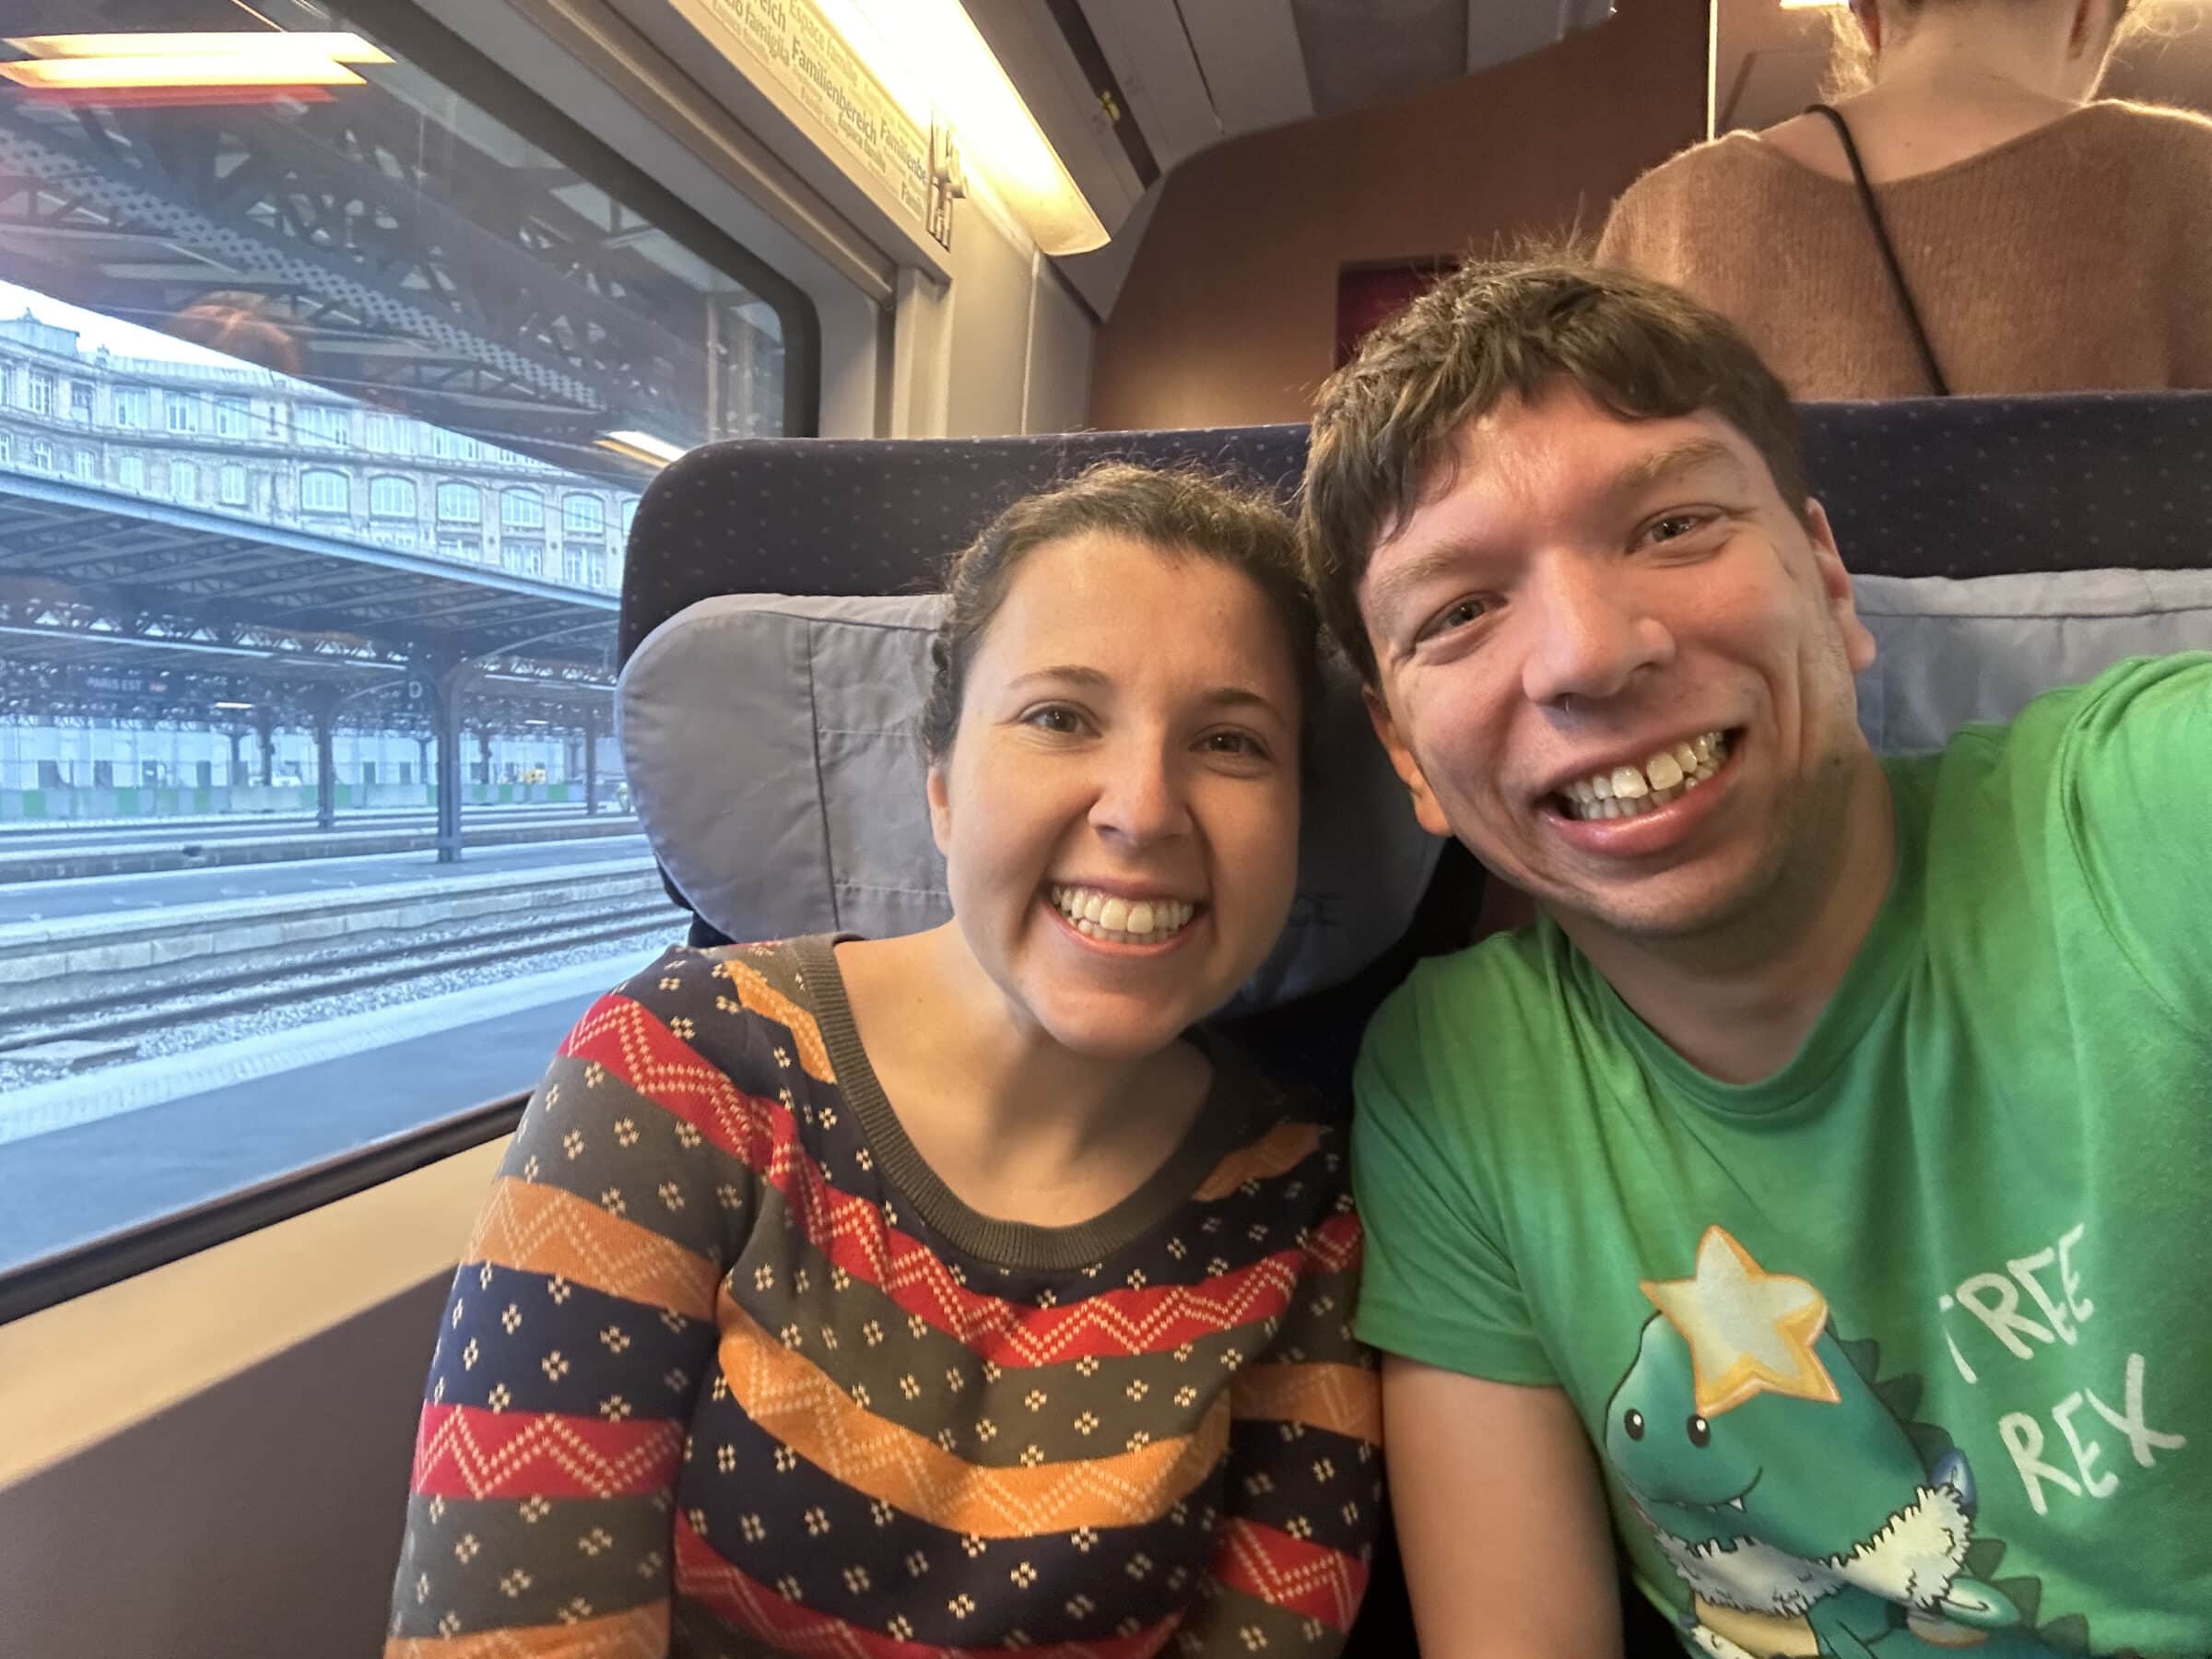 On the high-speed train through France